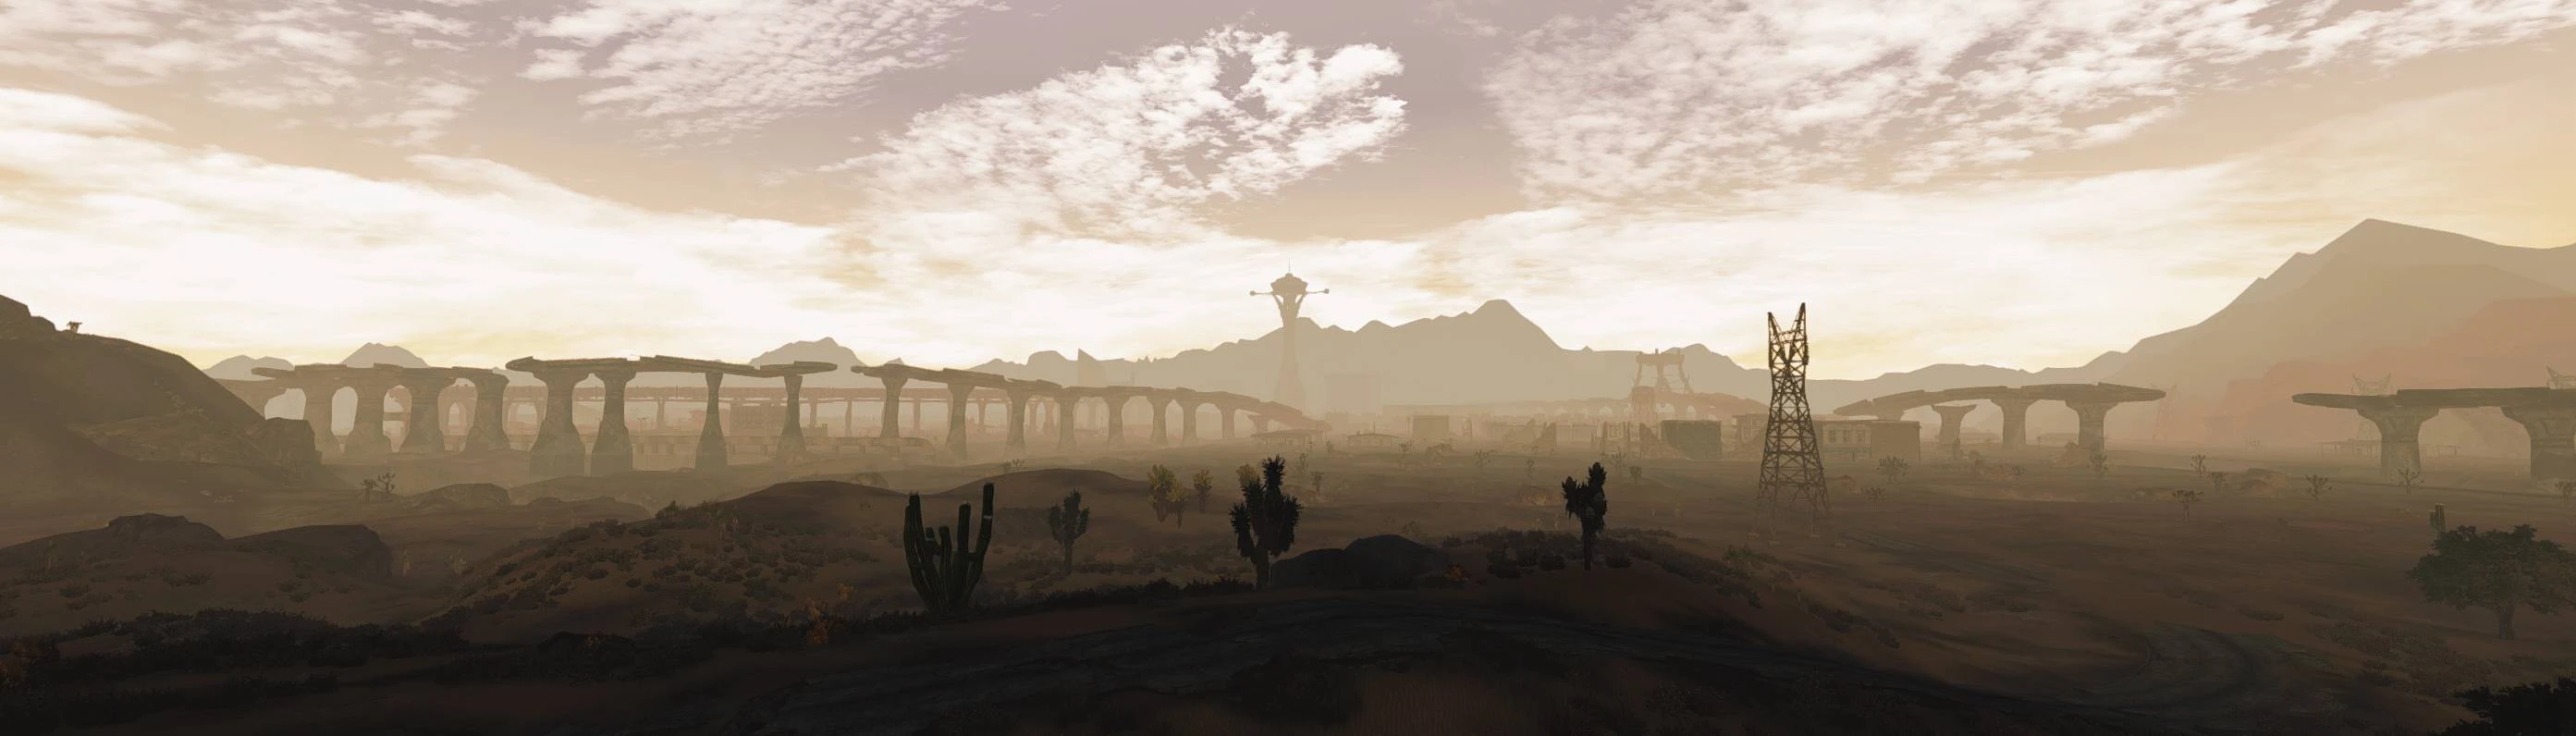 HOW BIG IS THE MAP in Fallout New Vegas? Walk Across the Map (longer  version) 